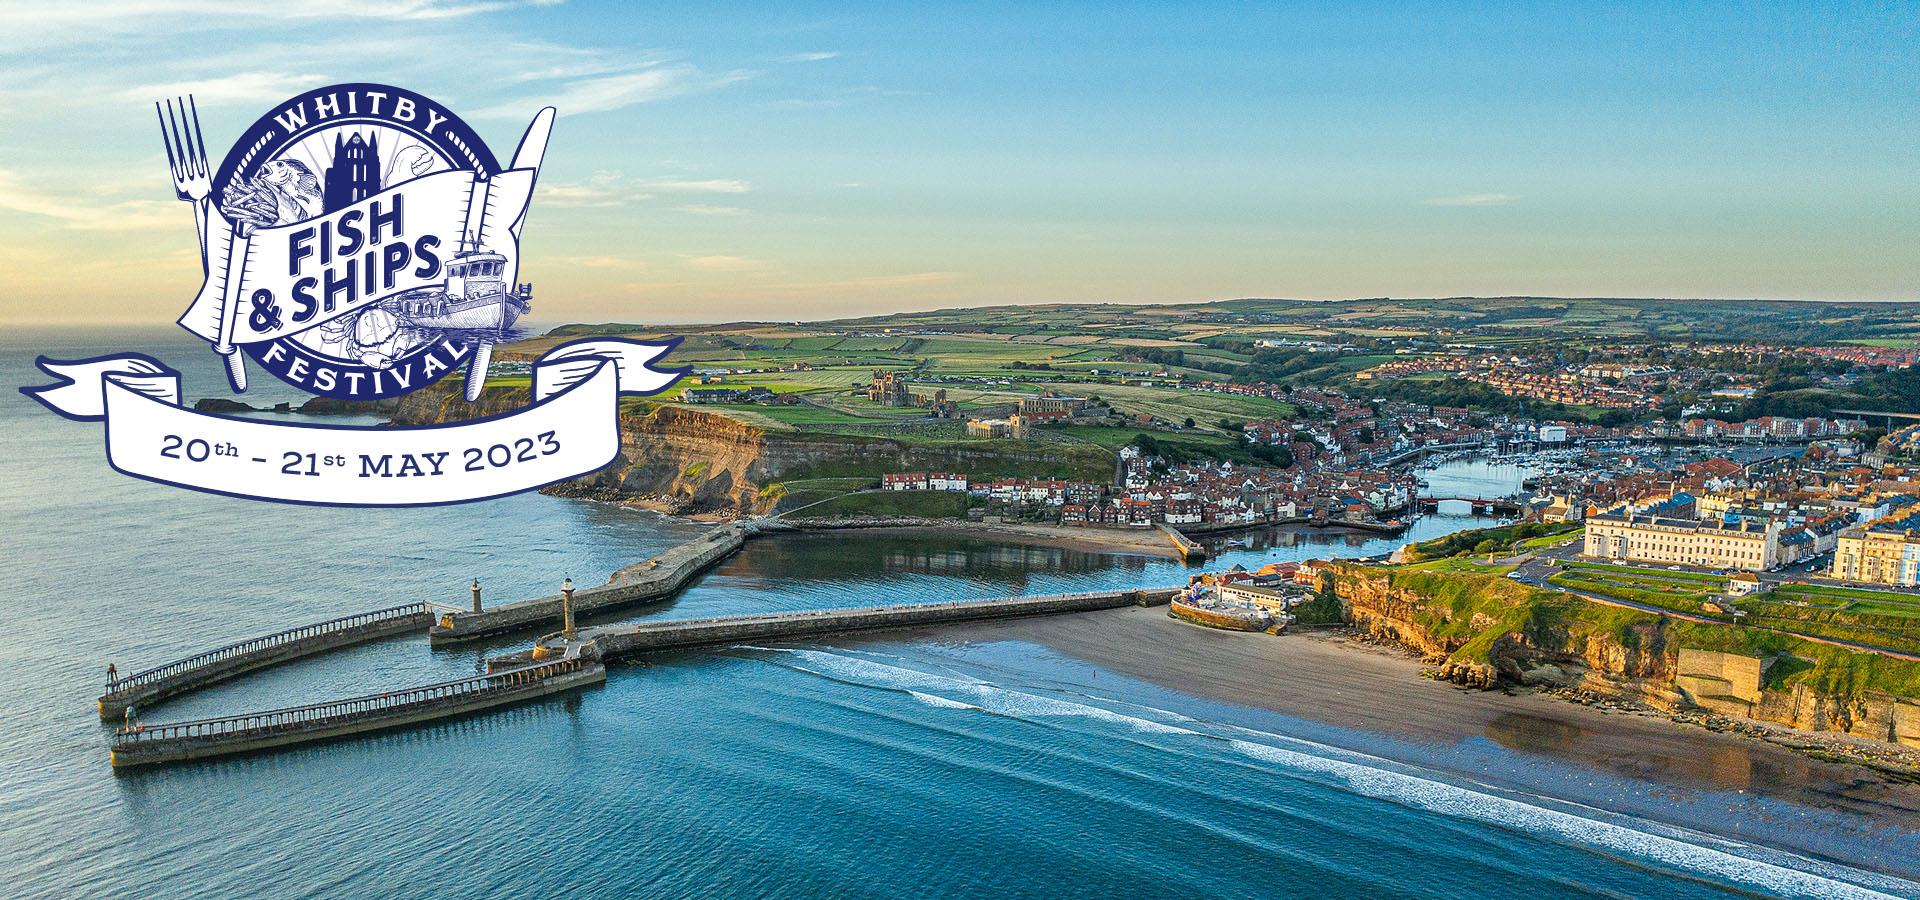 An Image of Whitby